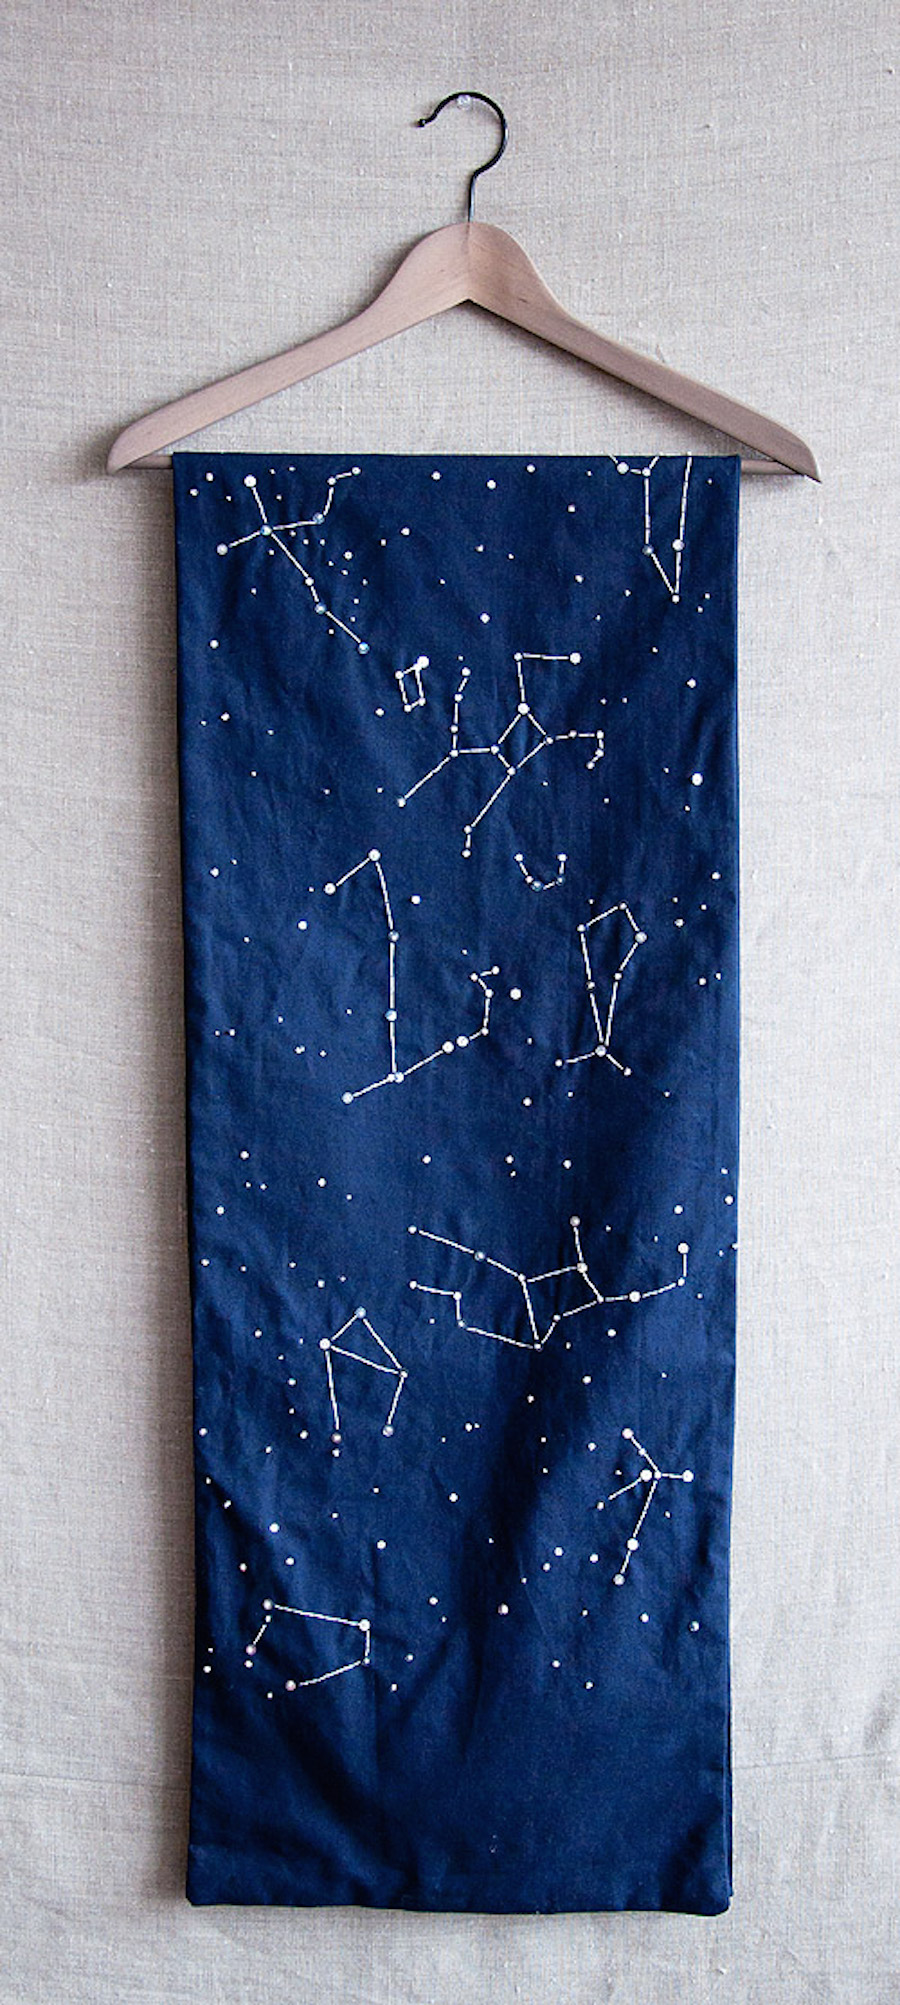 Constellations Stitched on Decorative Items5